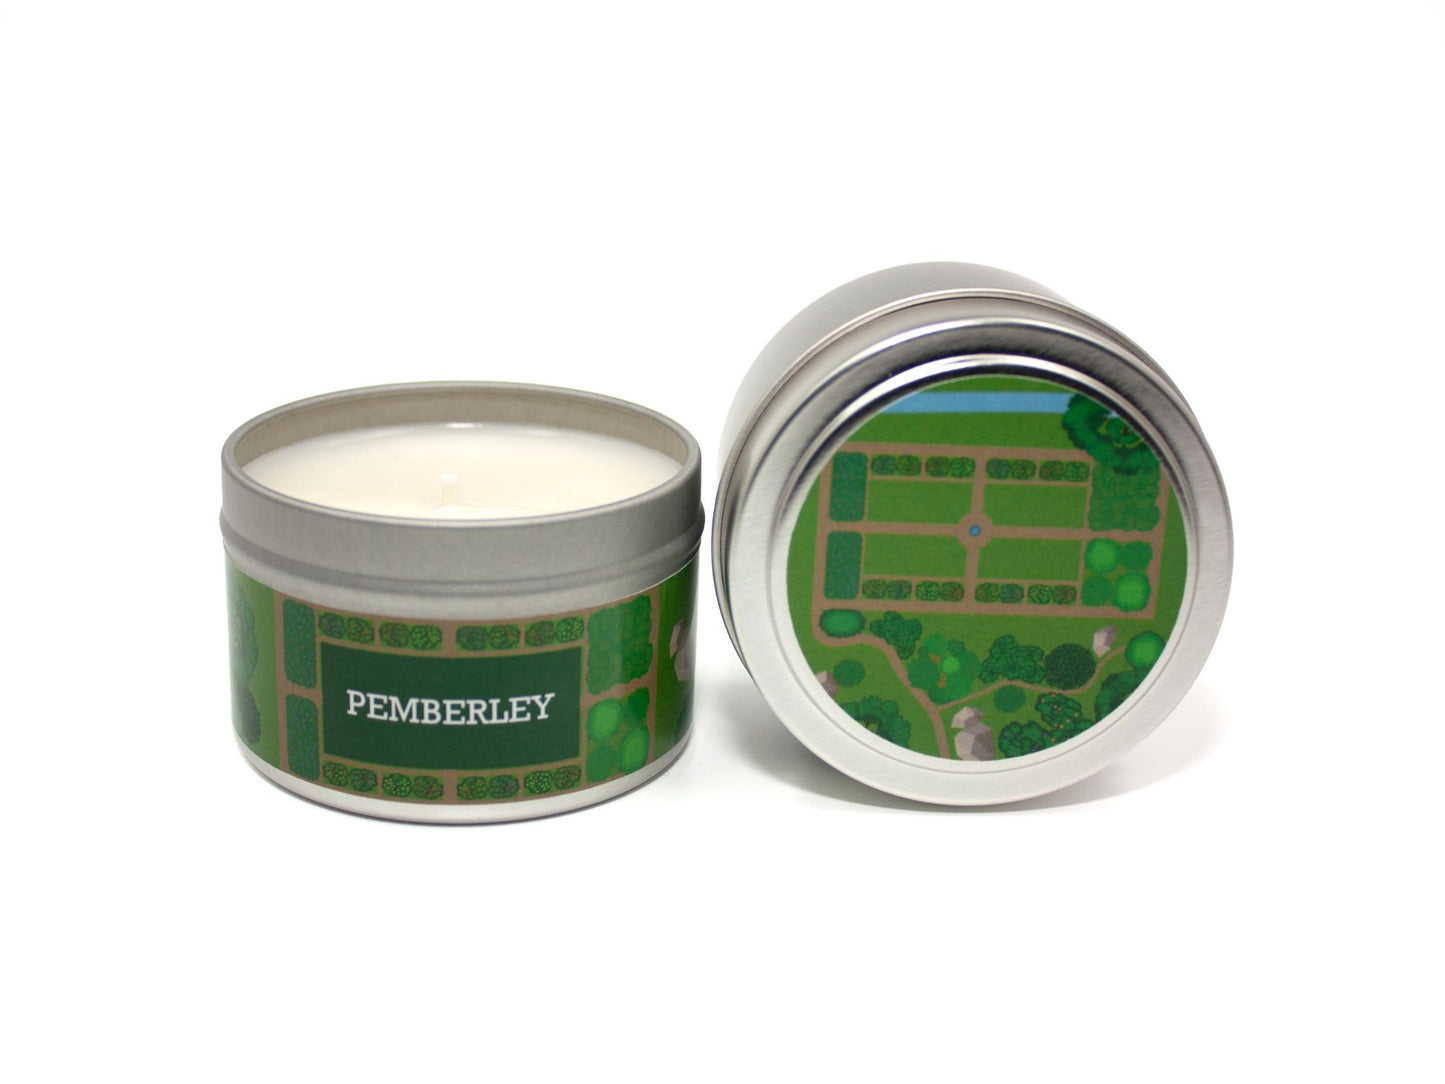 Onset & Rime English garden scented candle called "Pemberley" in a 4 oz silver tin. The circular label on top depicts a top-down view of Pemberley estates showing the garden and river. The text on the front label is "Pemberley - Violet, Rose, English Ivy".